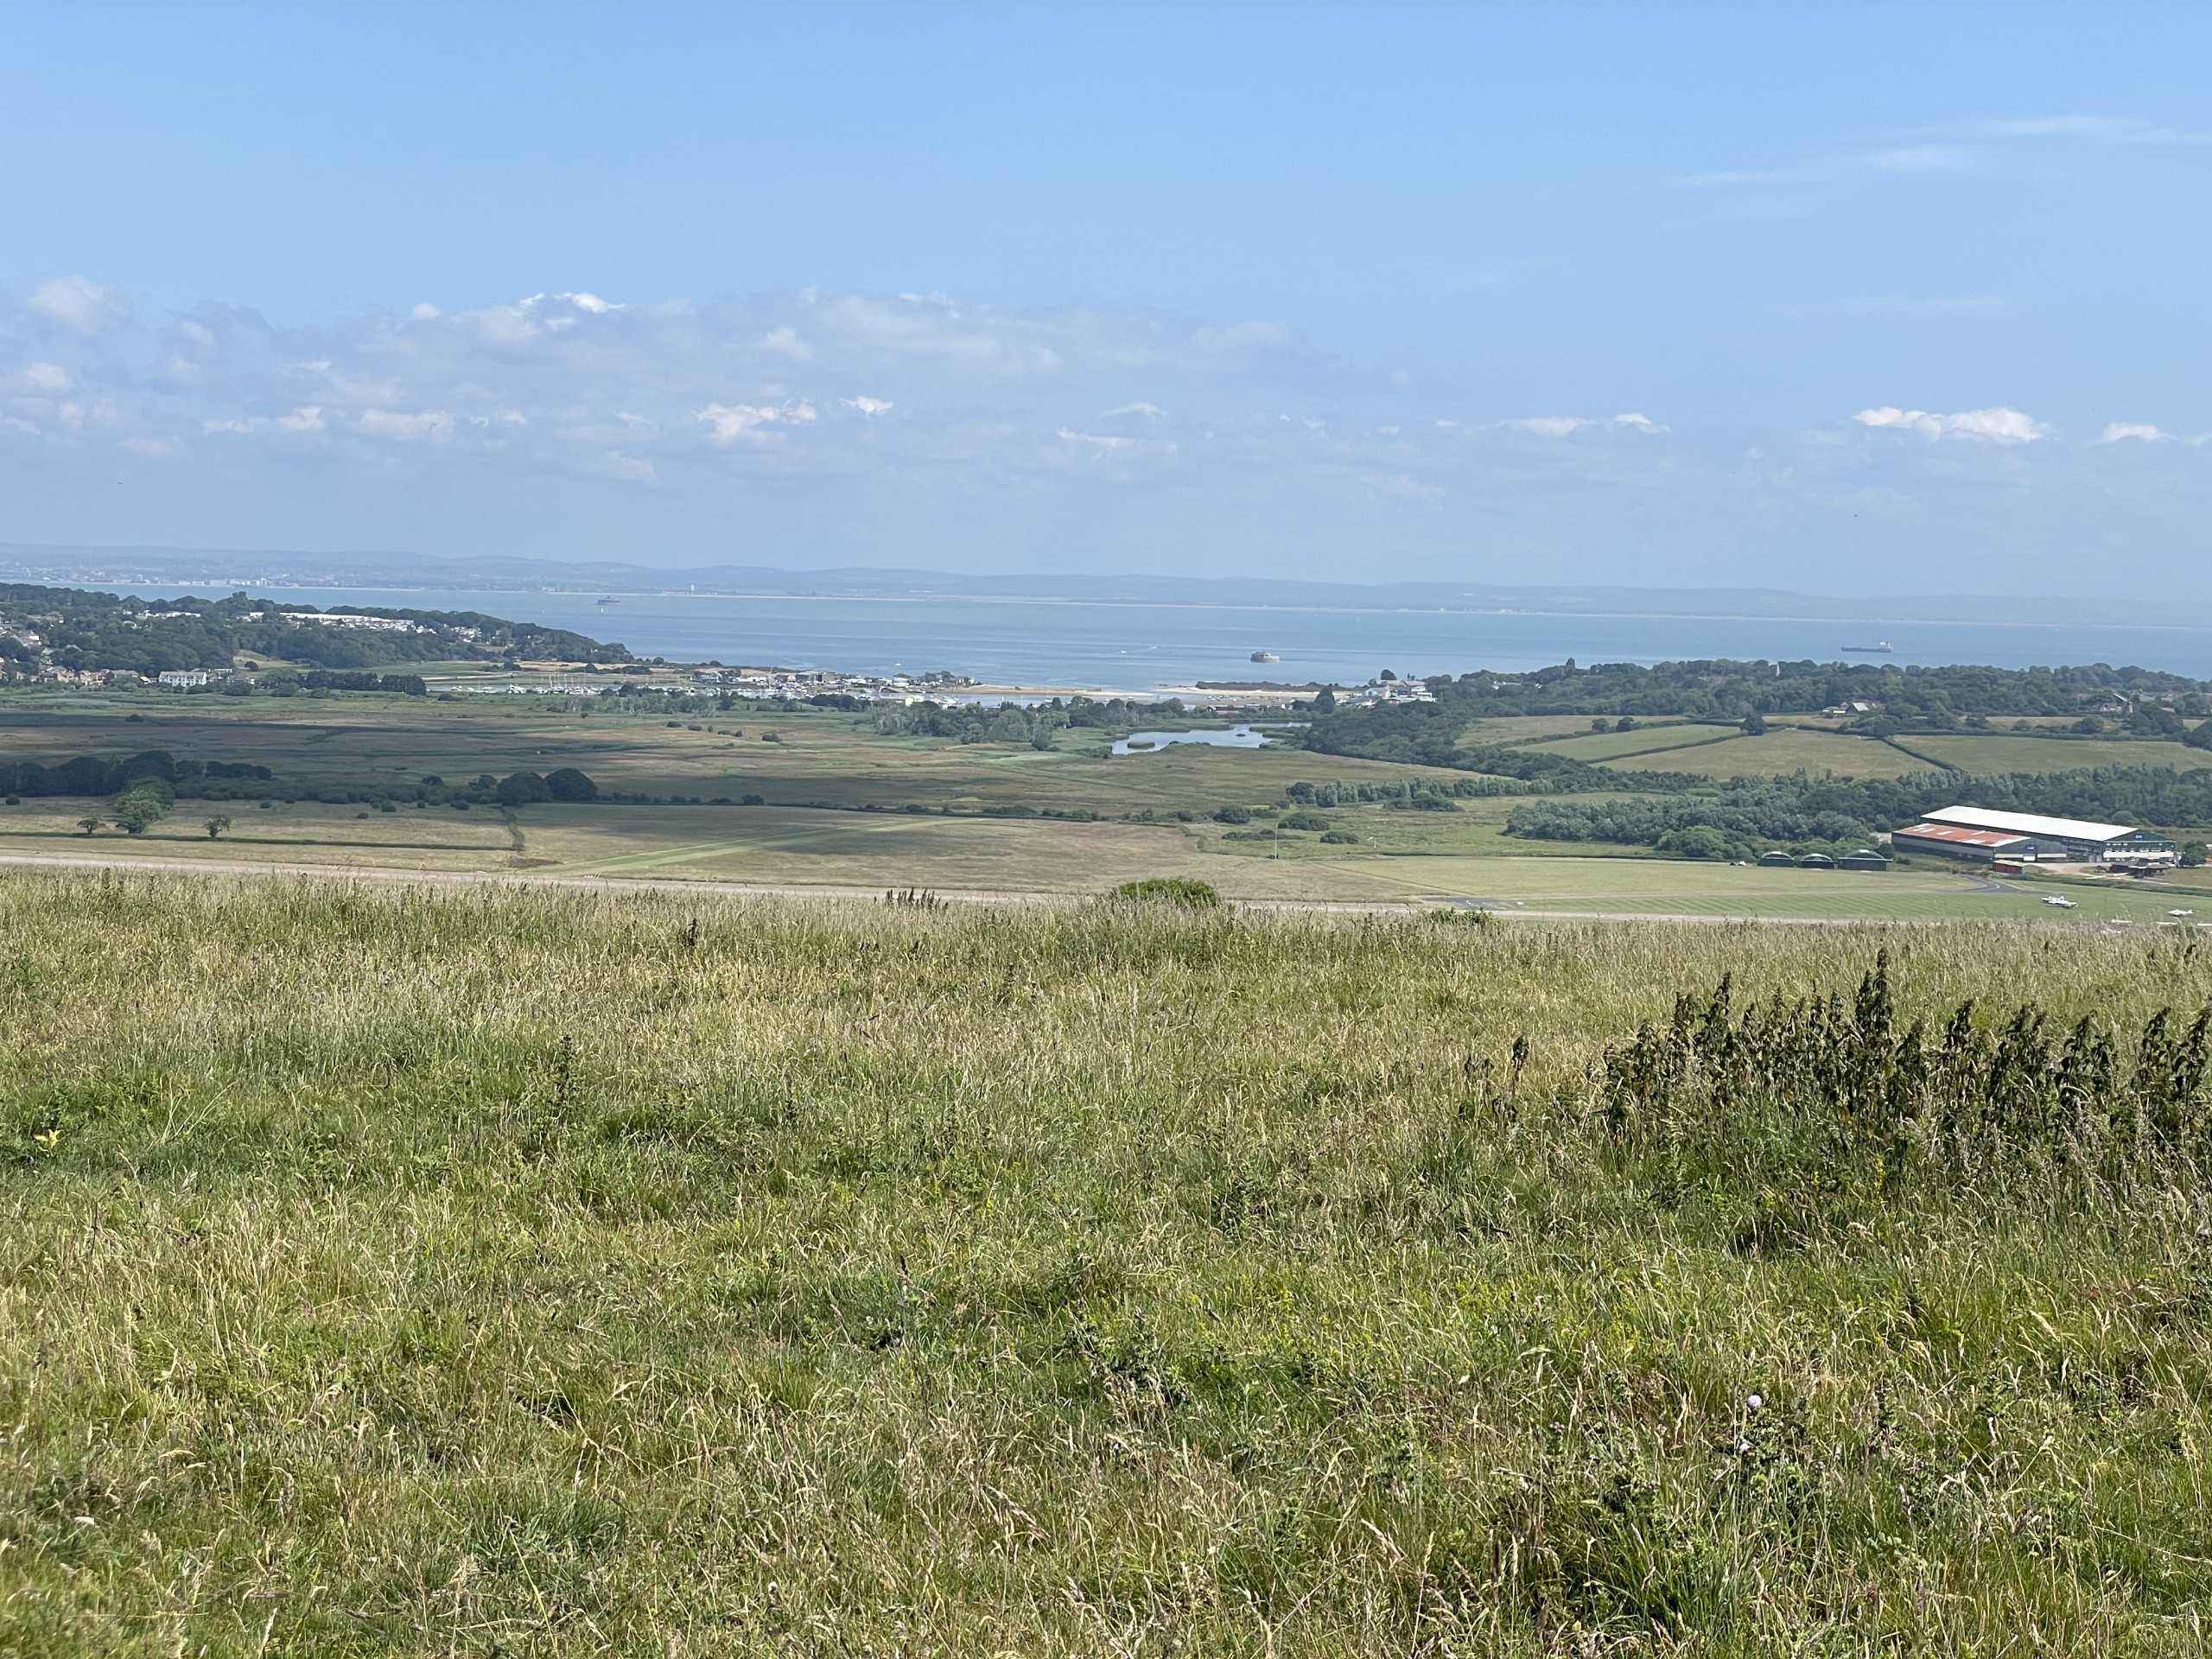 Where the French forces came ashore on the Isle of Wight.